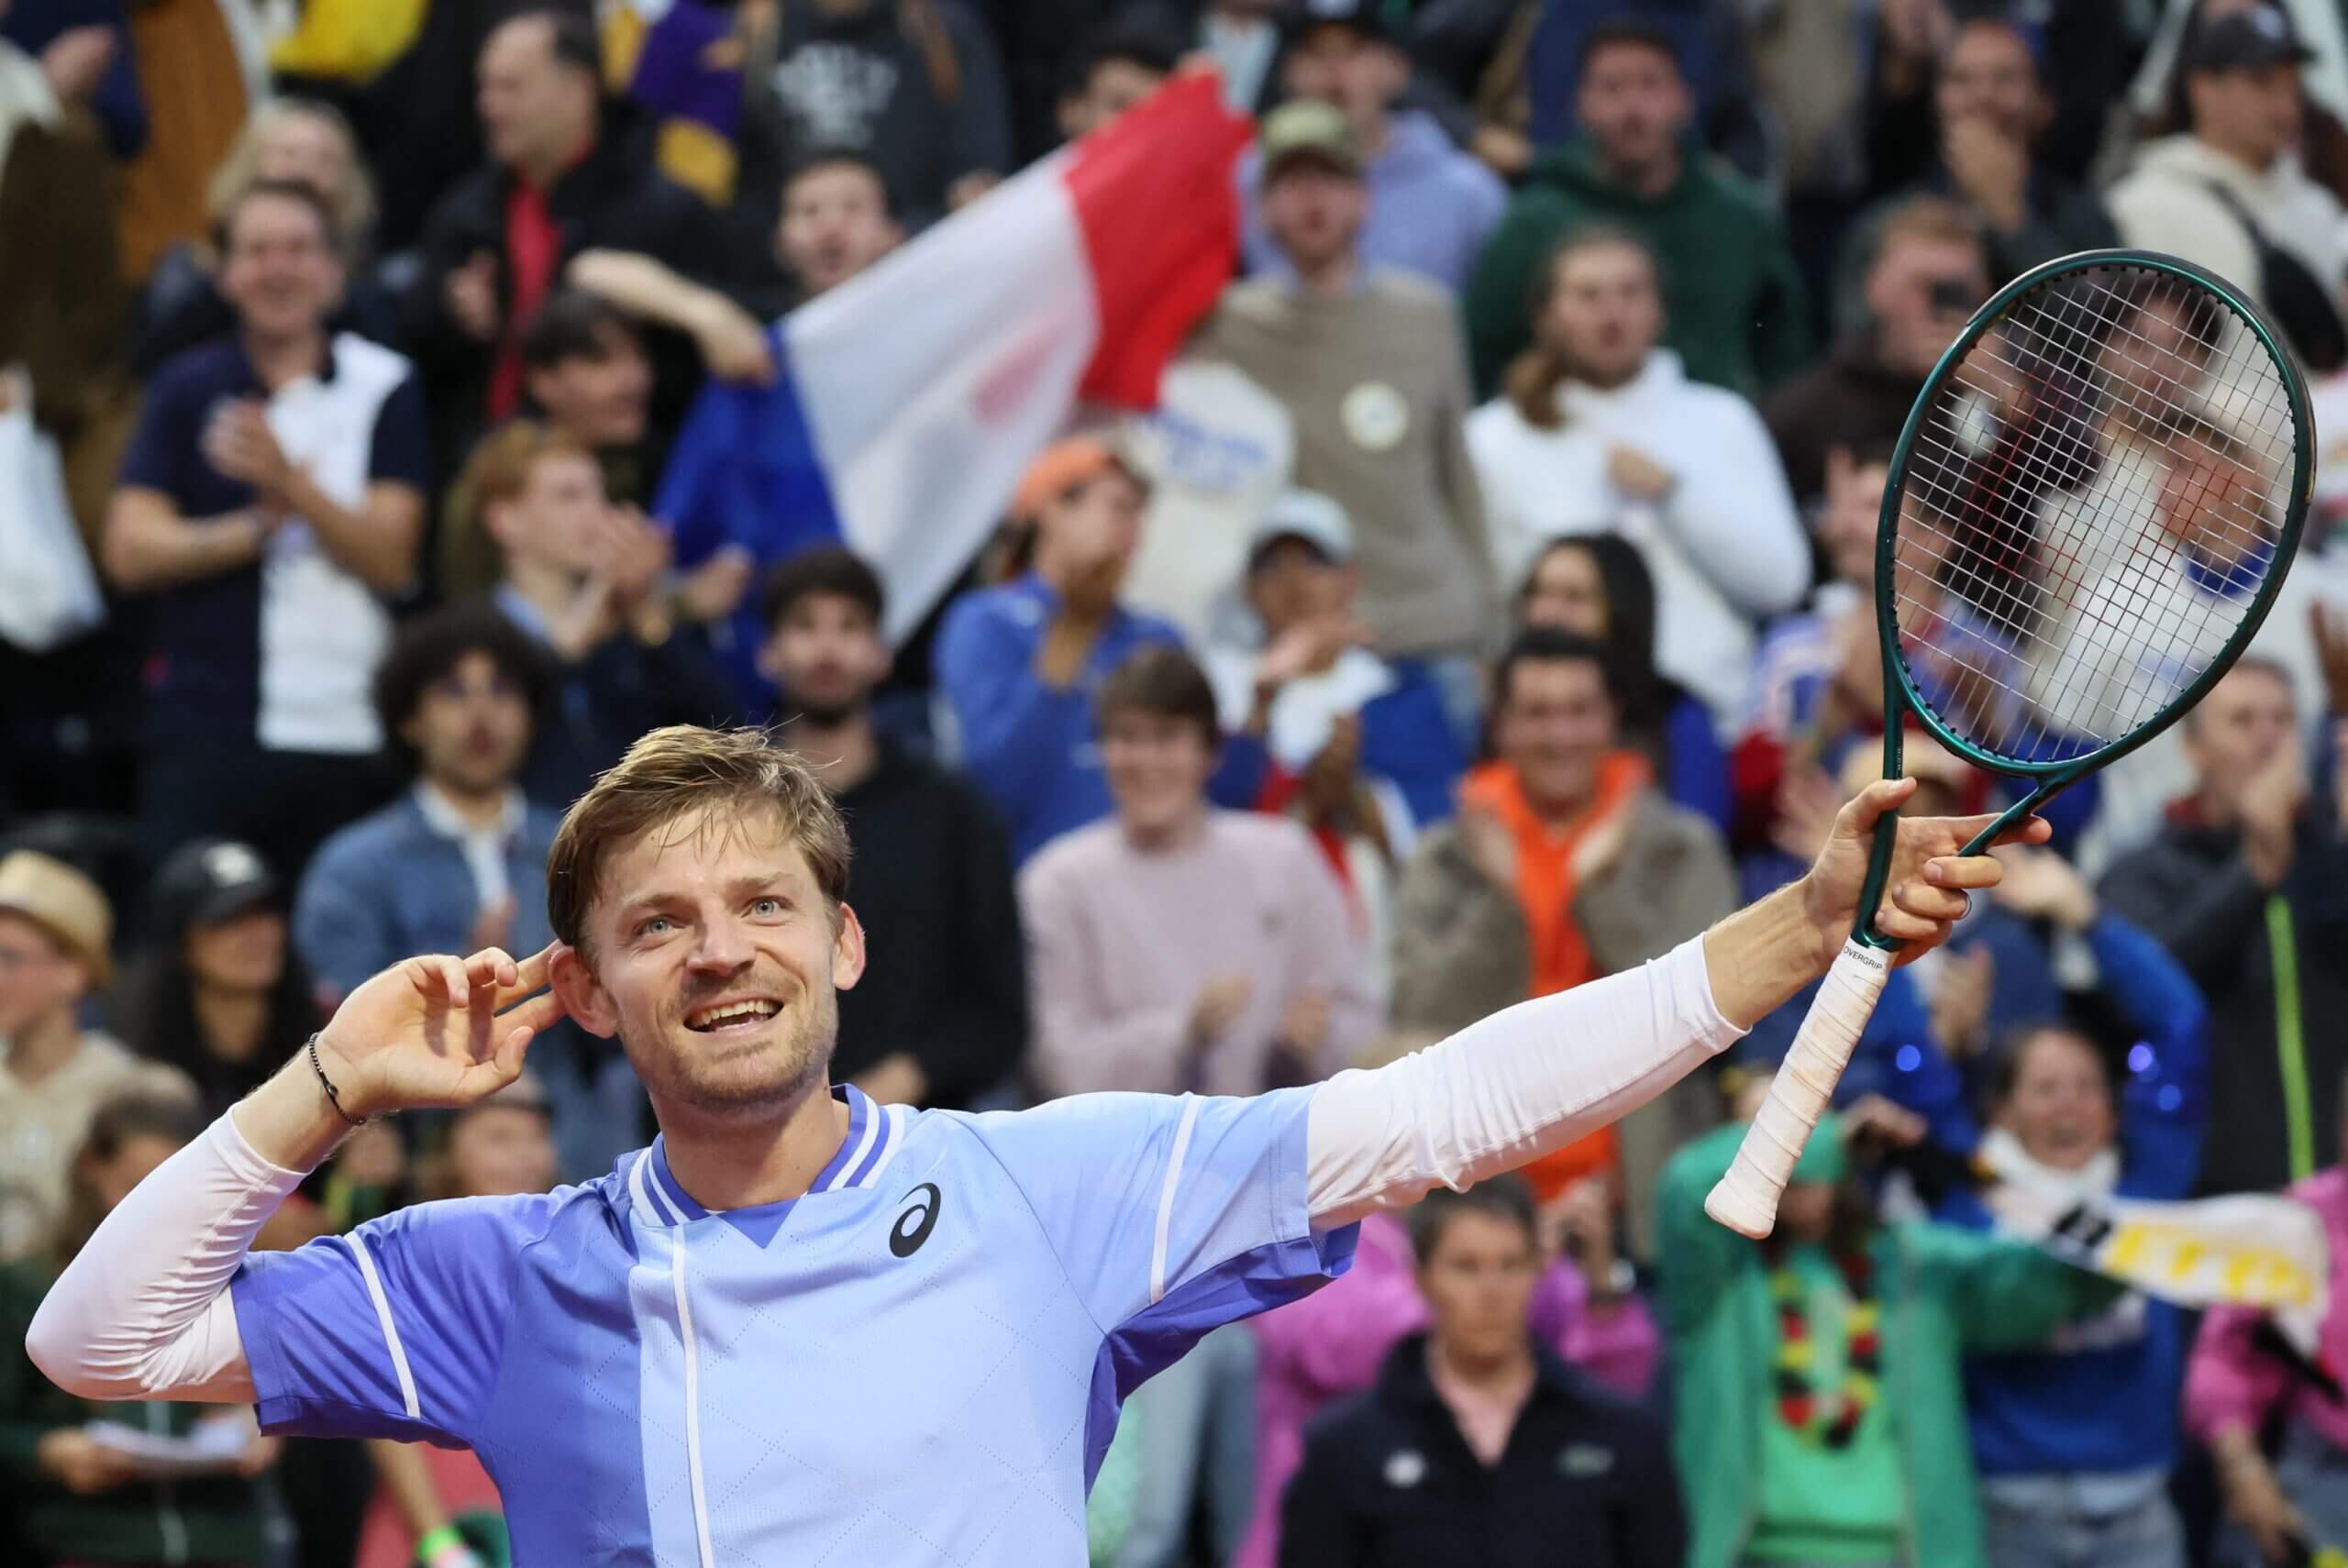 French Open day 3 recap: Tiebreaks from the gods, beautiful celebrations, Brits gone